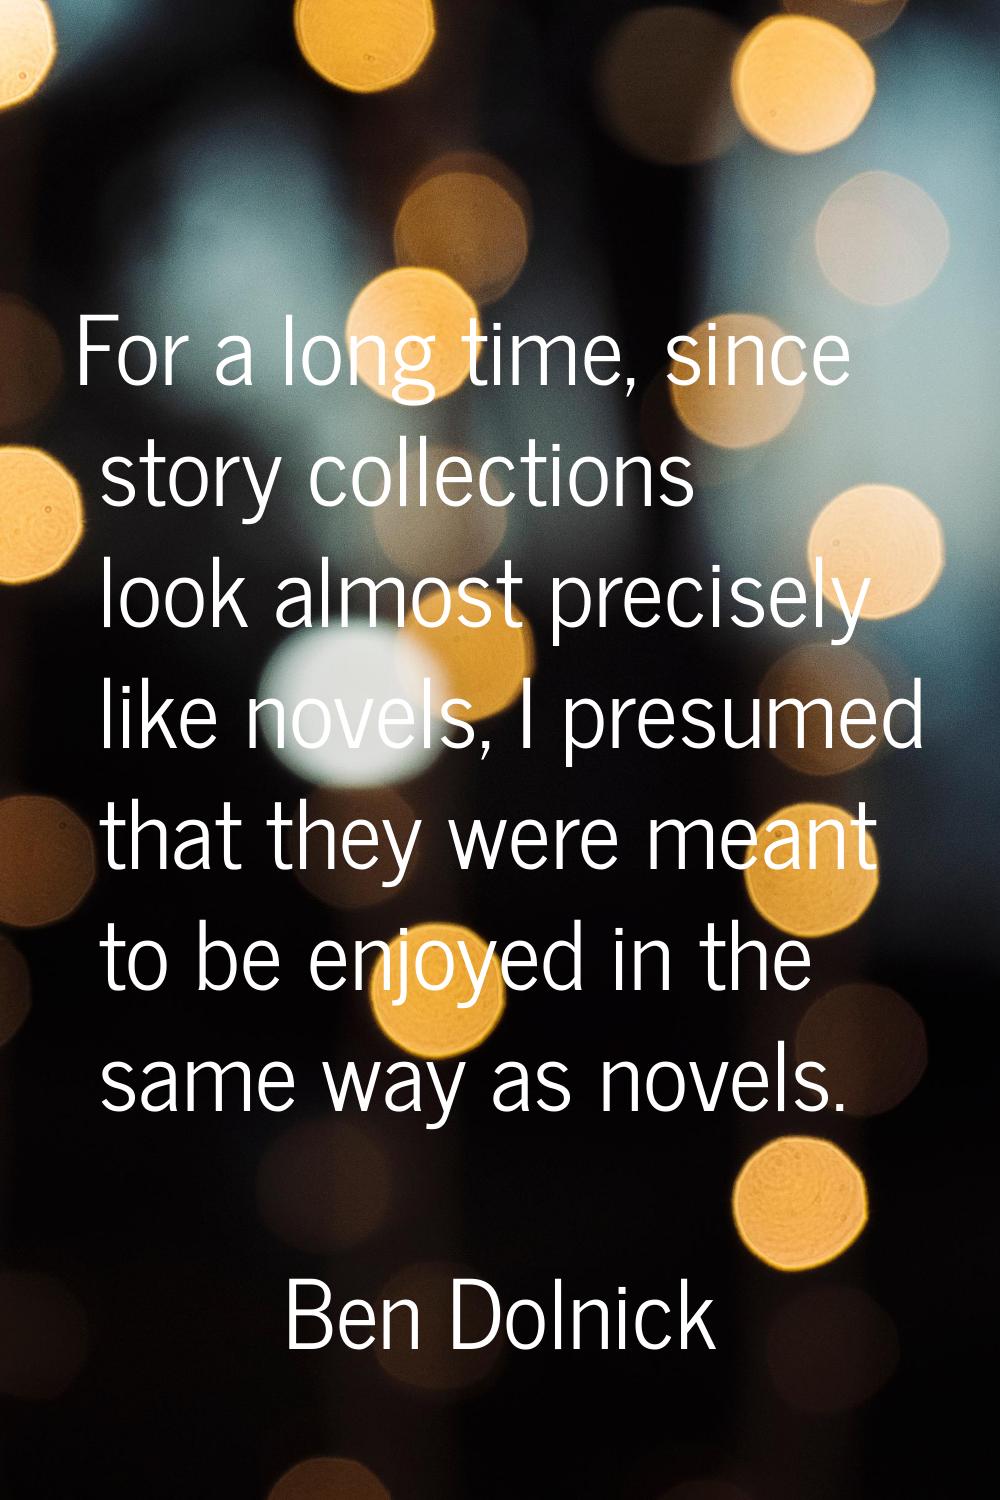 For a long time, since story collections look almost precisely like novels, I presumed that they we